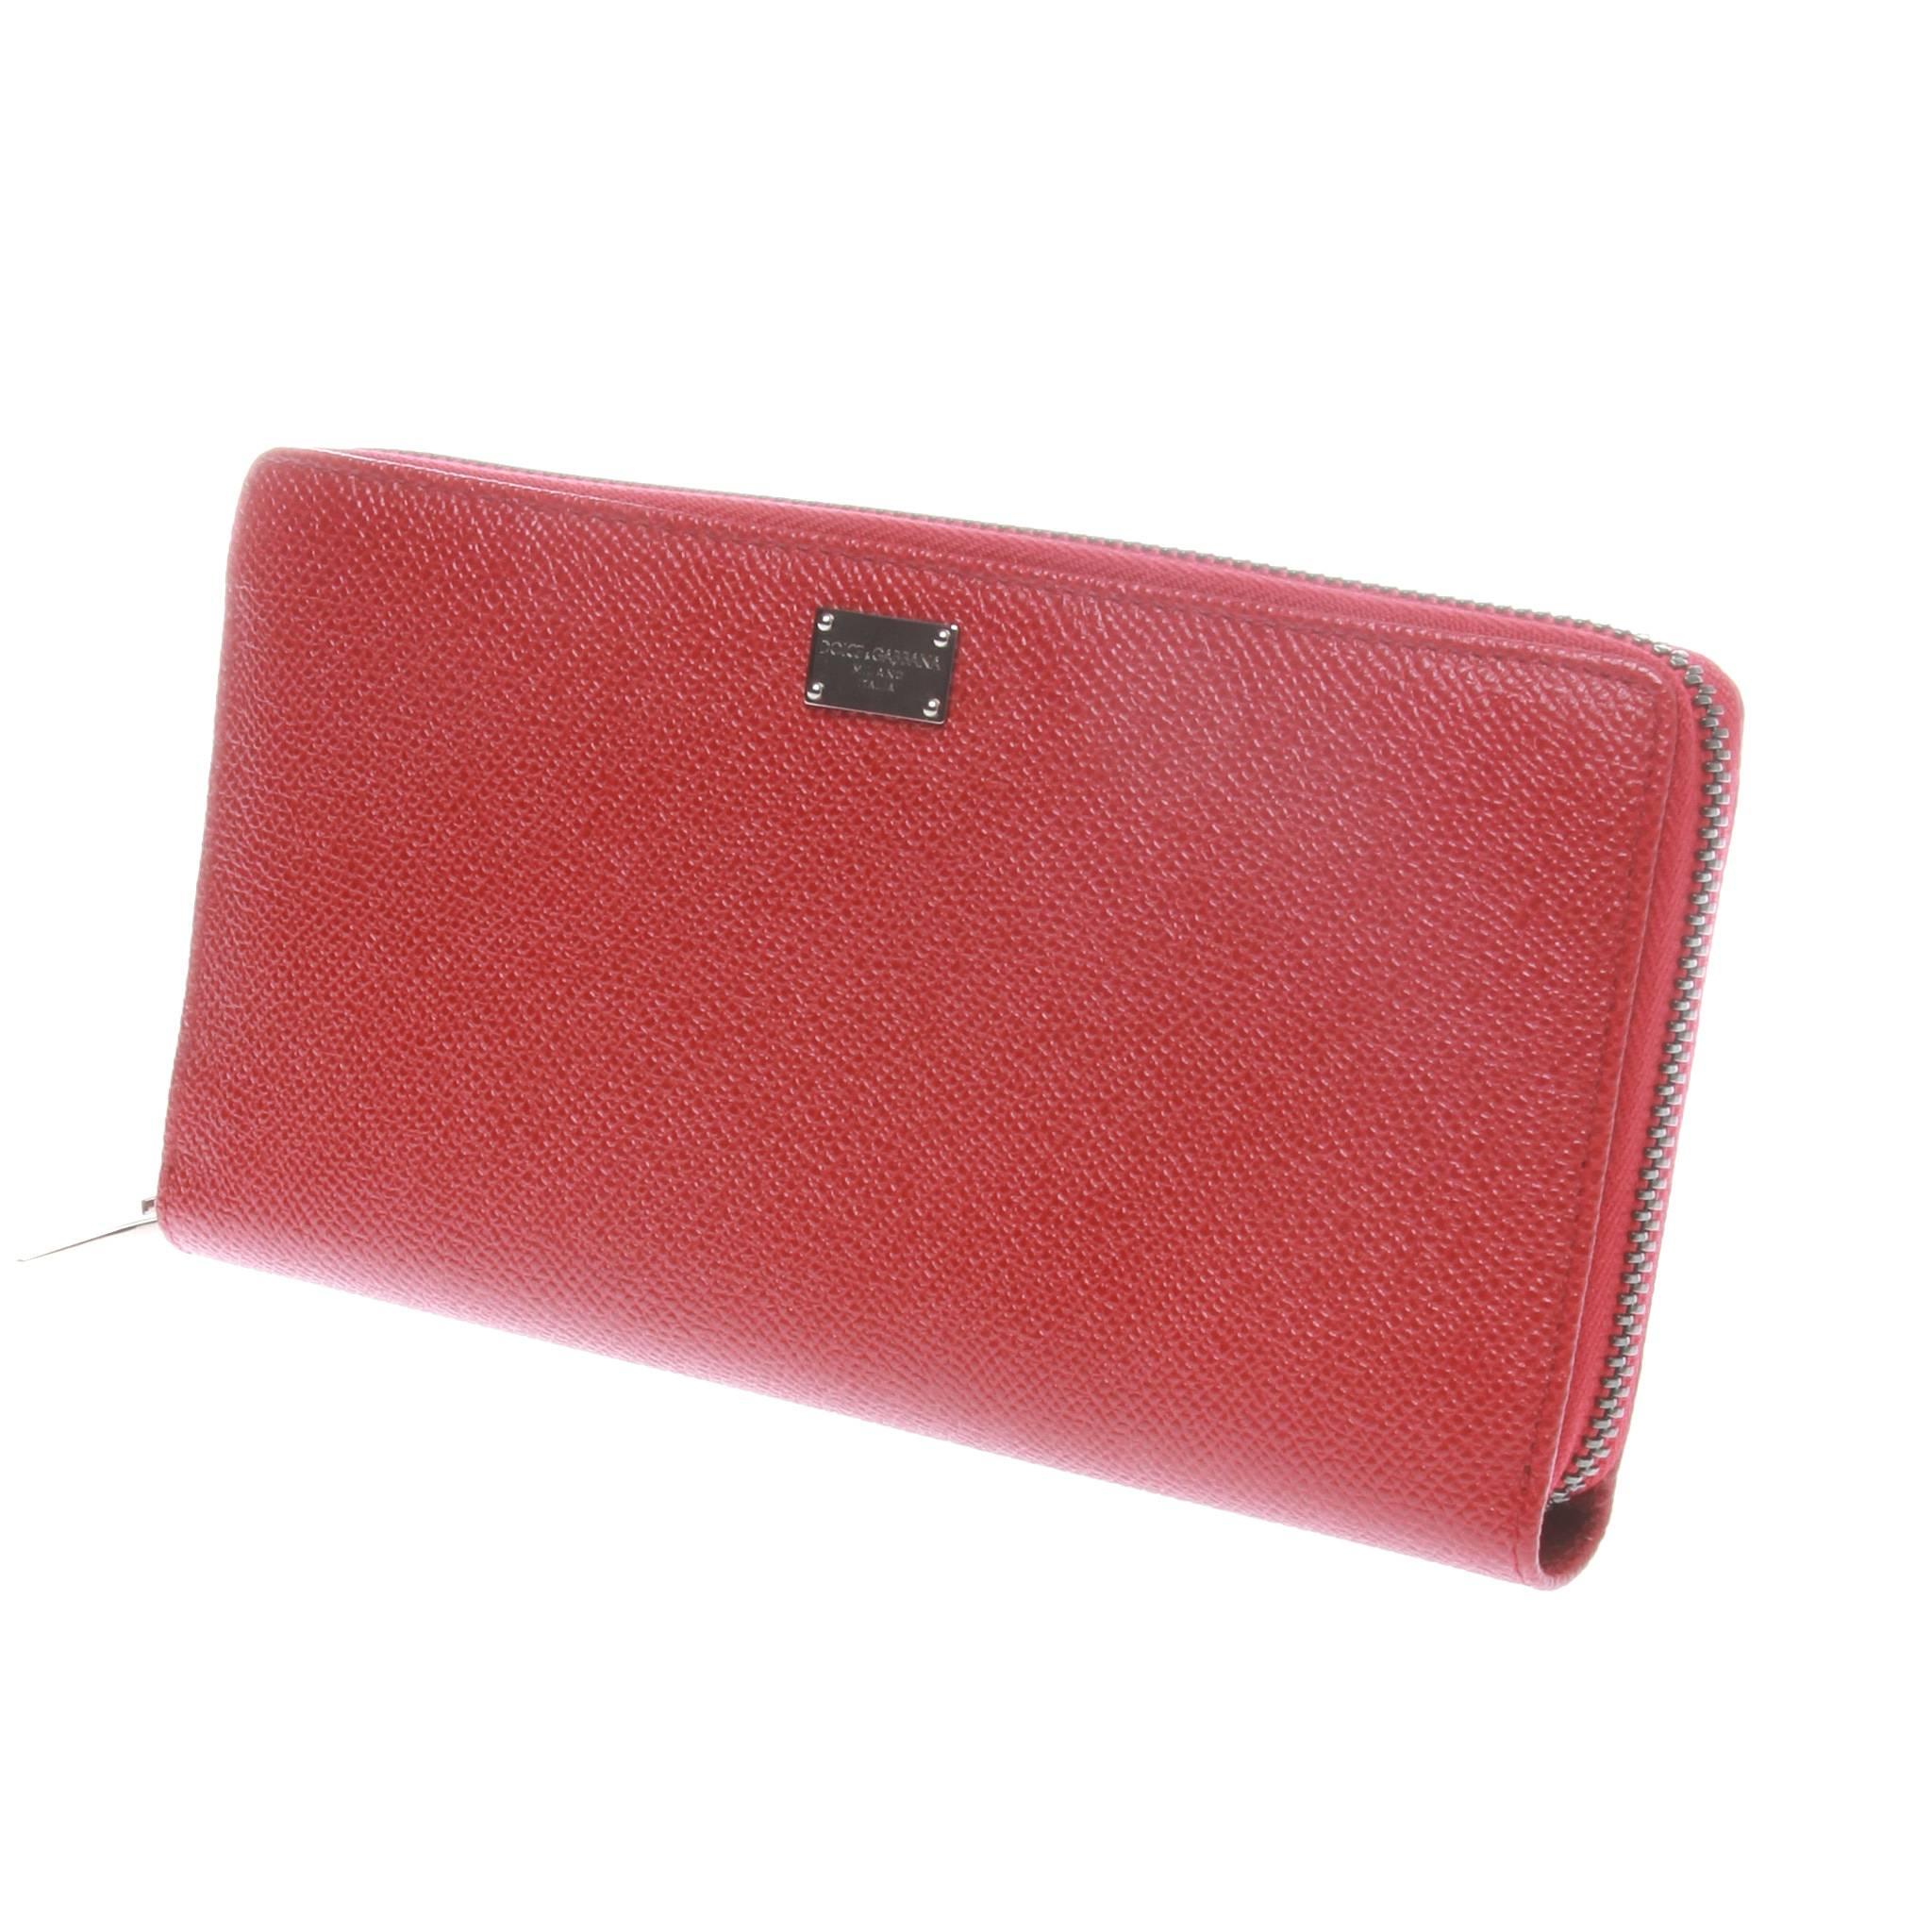 	DOLCE & GABBANA red print zip around leather wallet For Sale